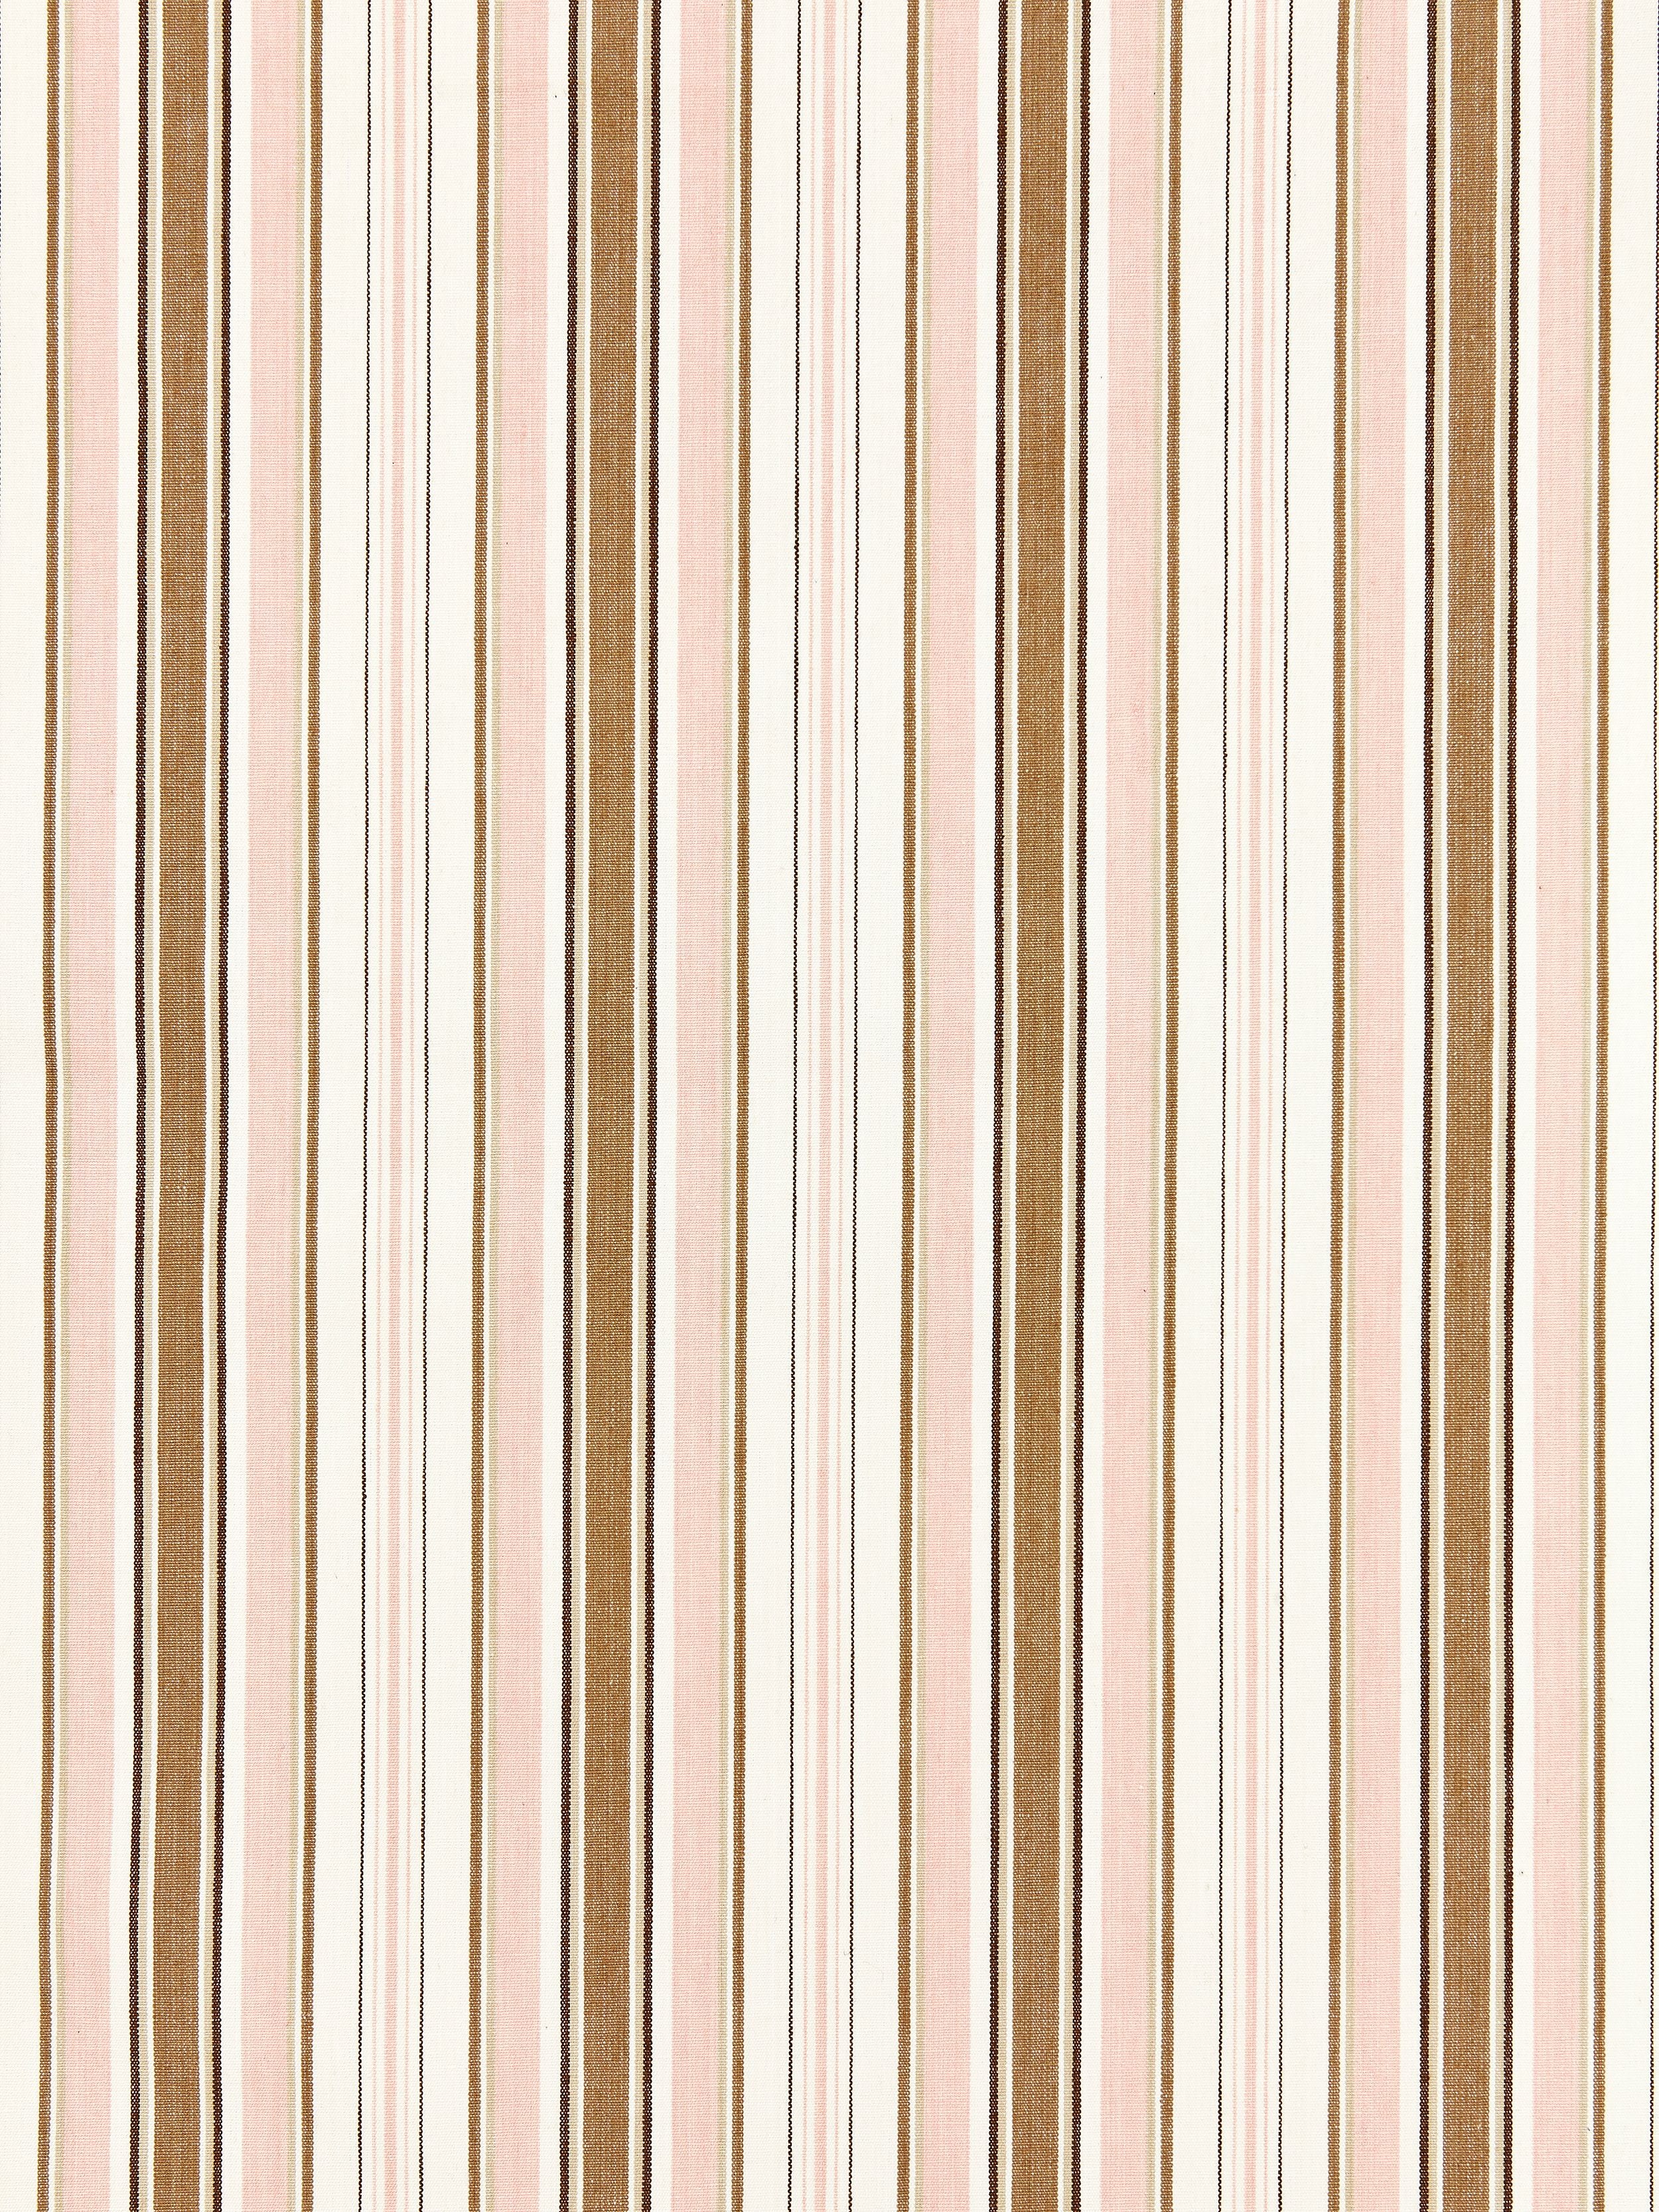 Andover Cotton Stripe fabric in blush color - pattern number SC 000127113 - by Scalamandre in the Scalamandre Fabrics Book 1 collection